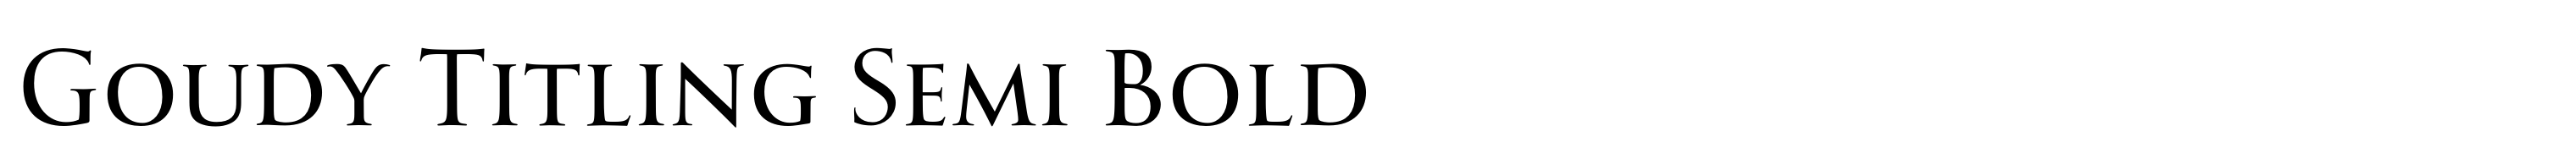 Goudy Titling Semi Bold